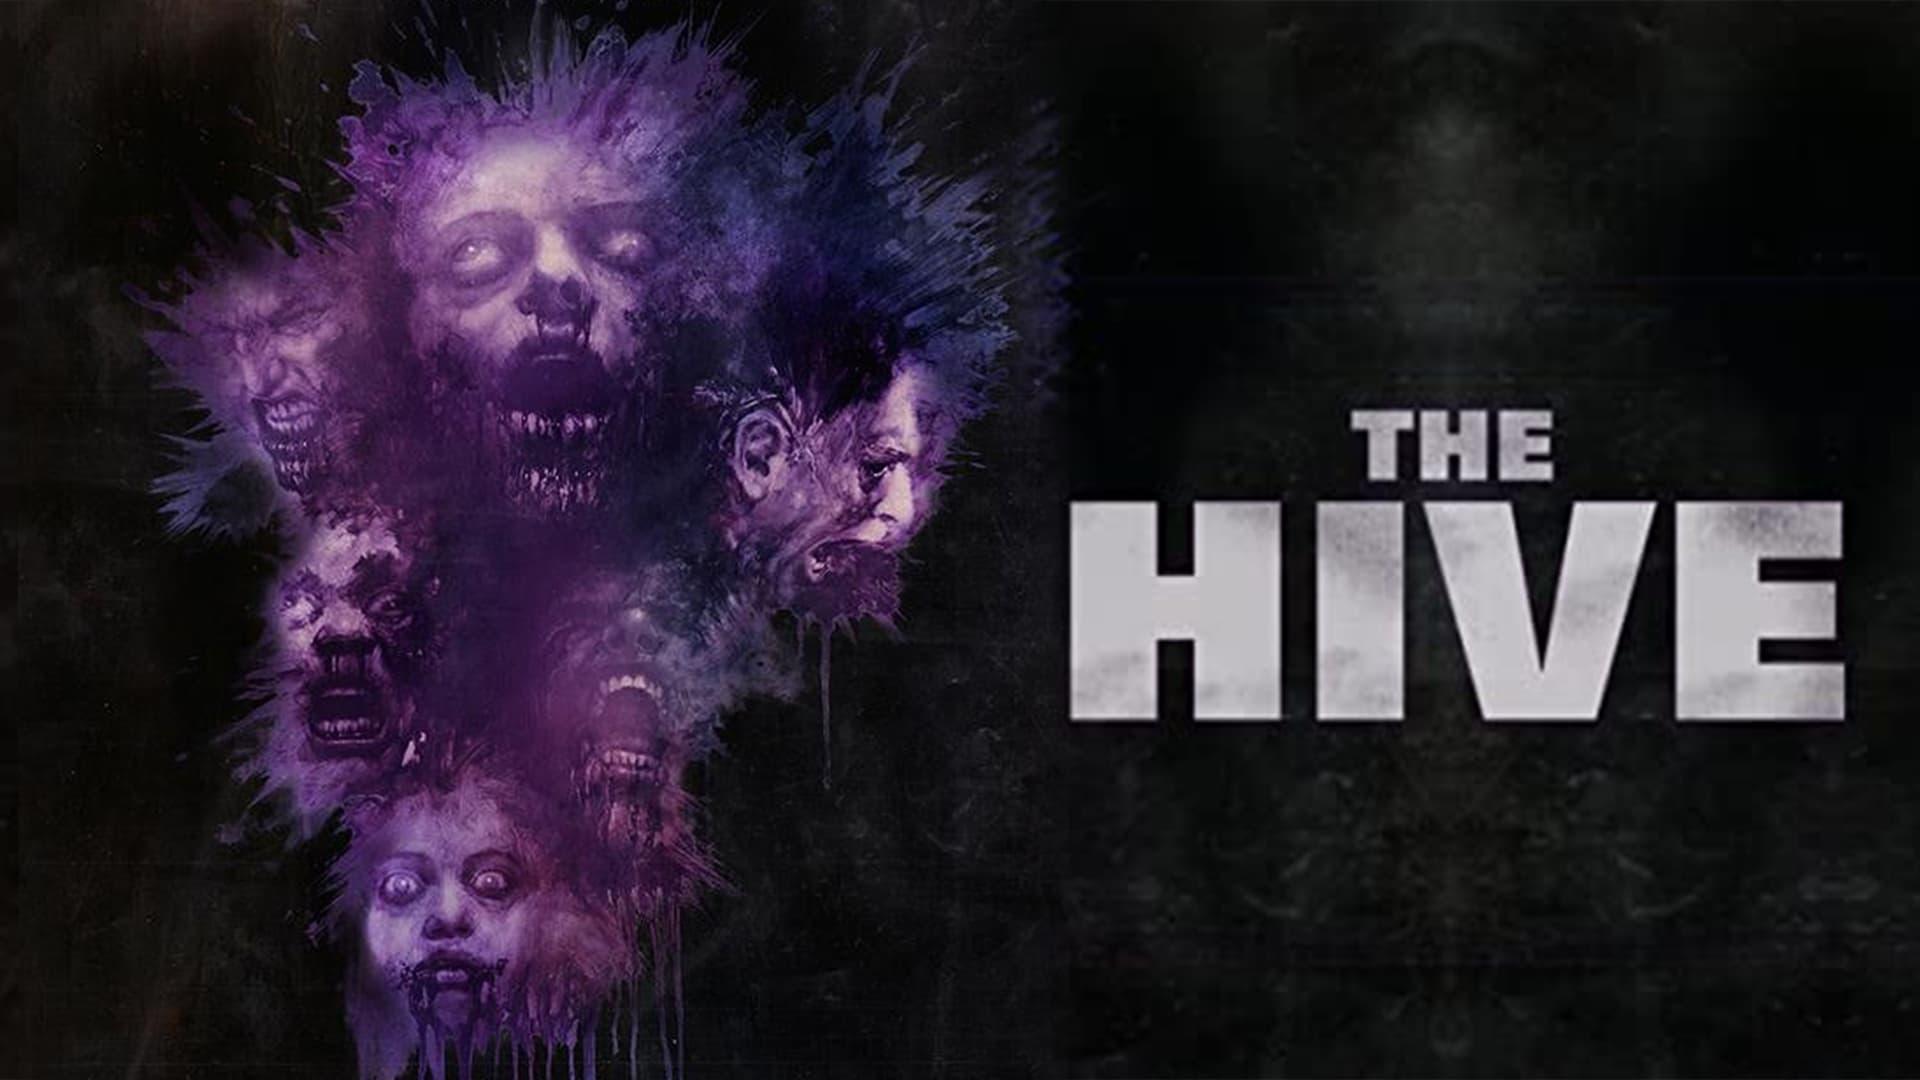 The Hive backdrop